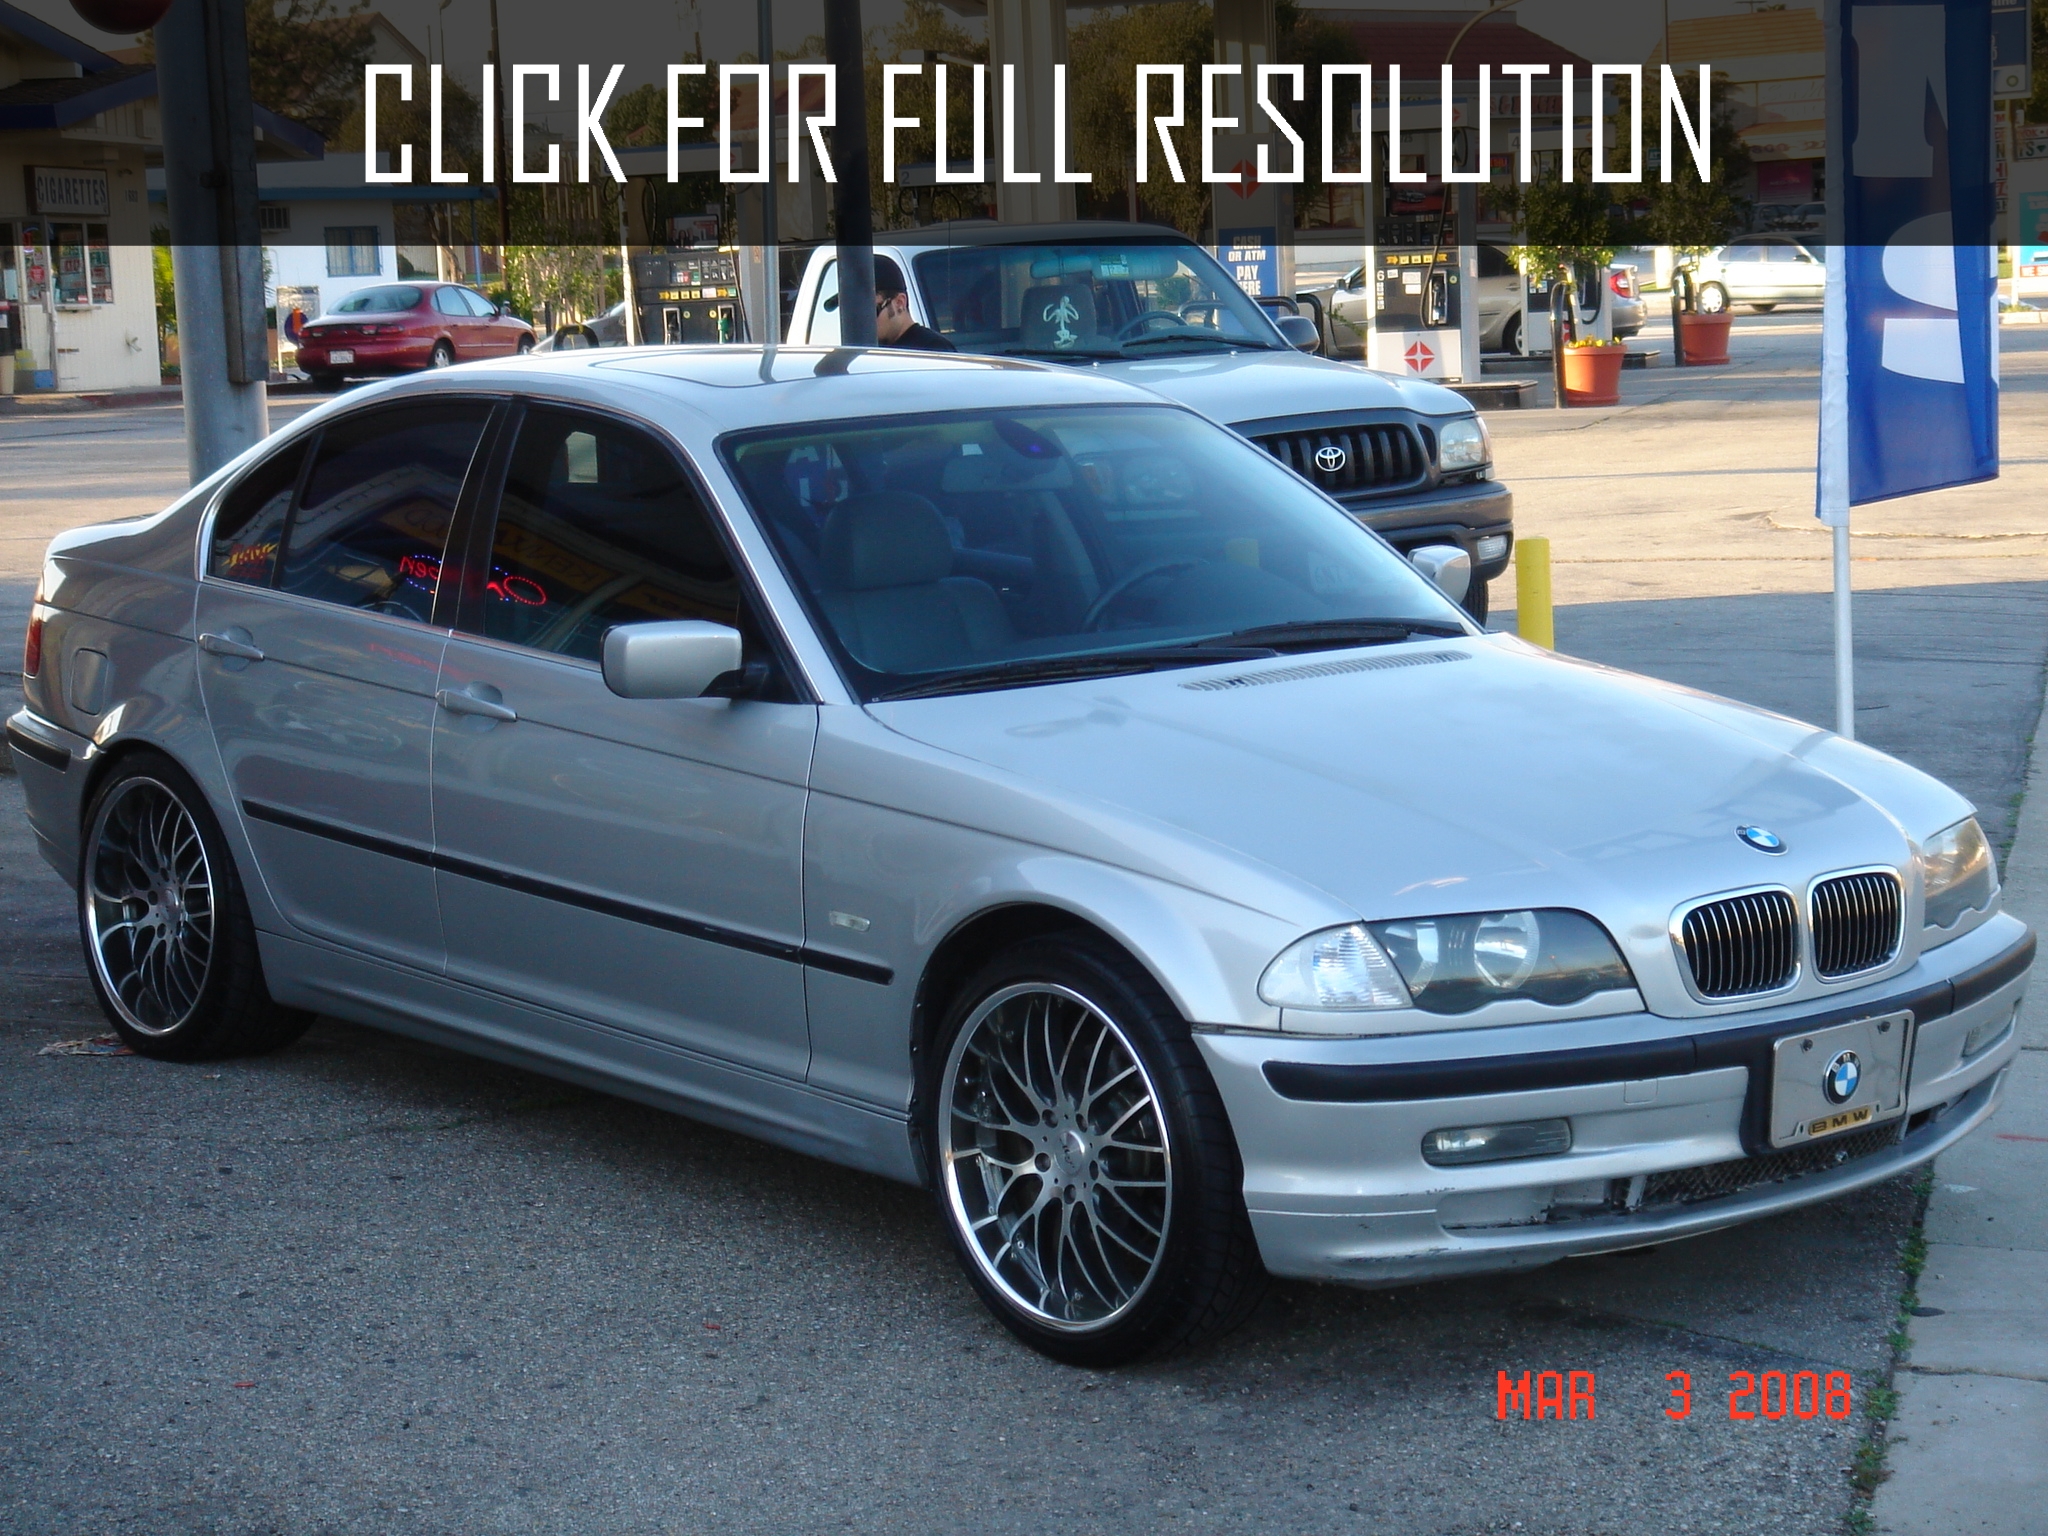 2000 Bmw E46 news, reviews, msrp, ratings with amazing